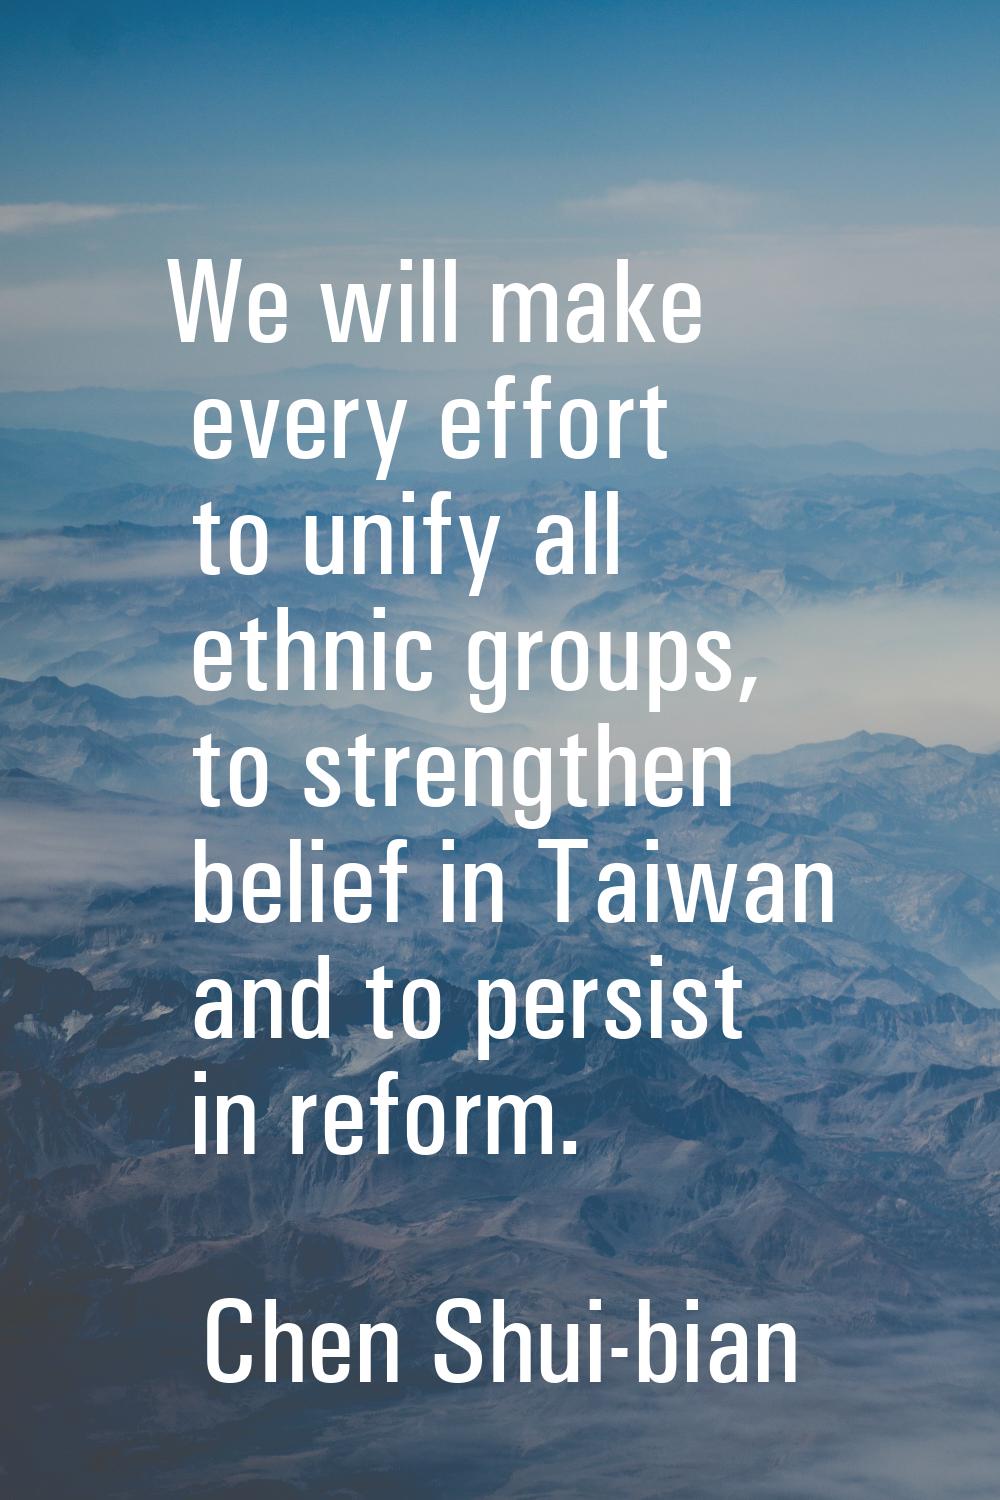 We will make every effort to unify all ethnic groups, to strengthen belief in Taiwan and to persist